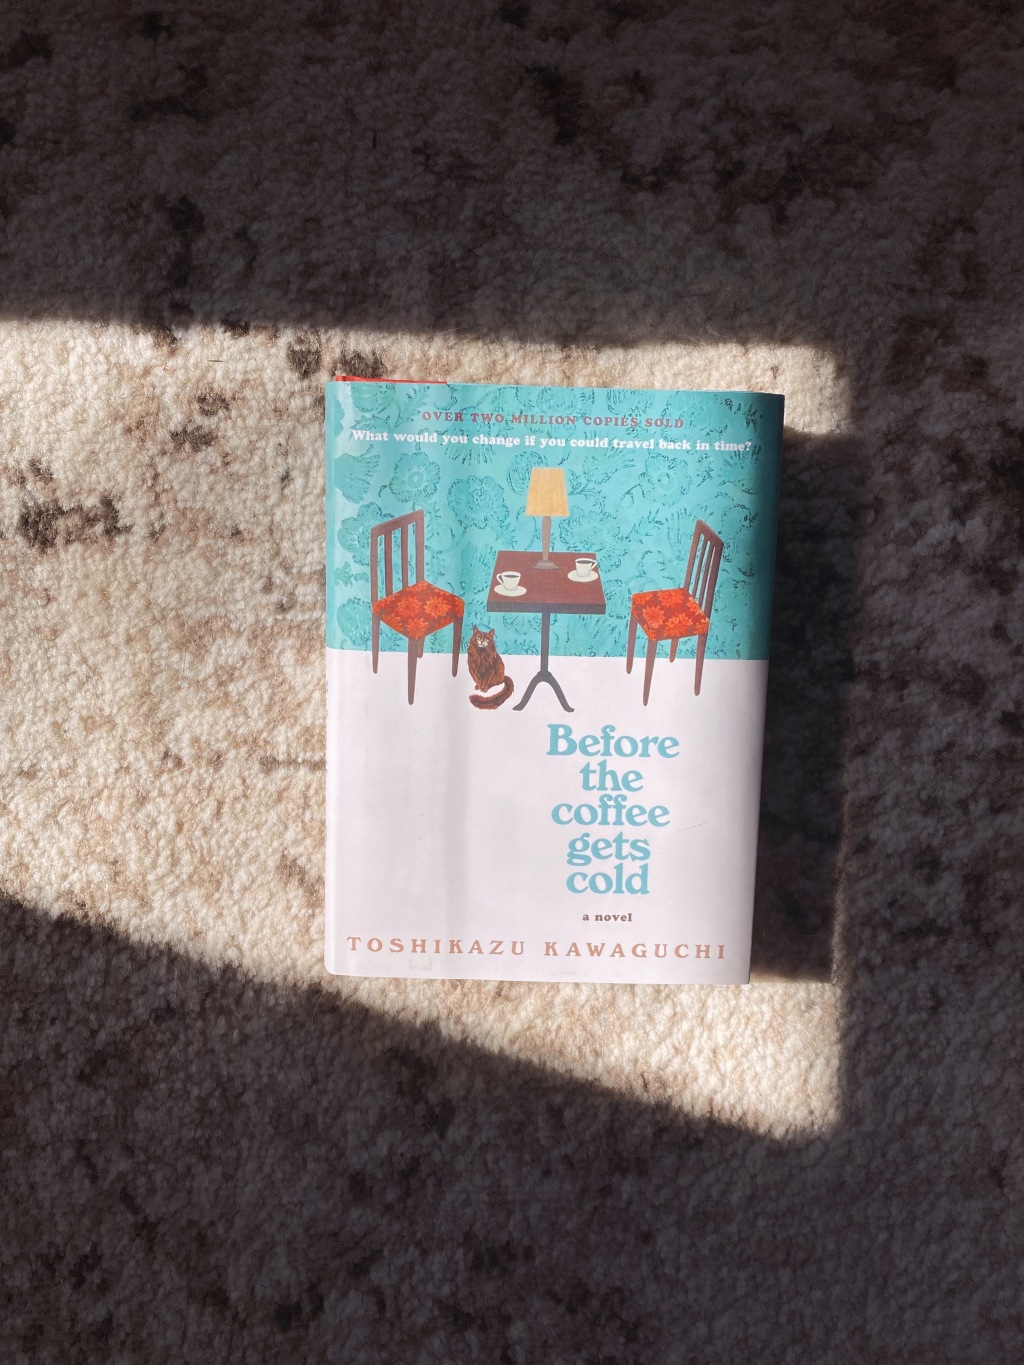 Book Review: “Before the Coffee Gets Cold” by Toshikazu Kawaguchi